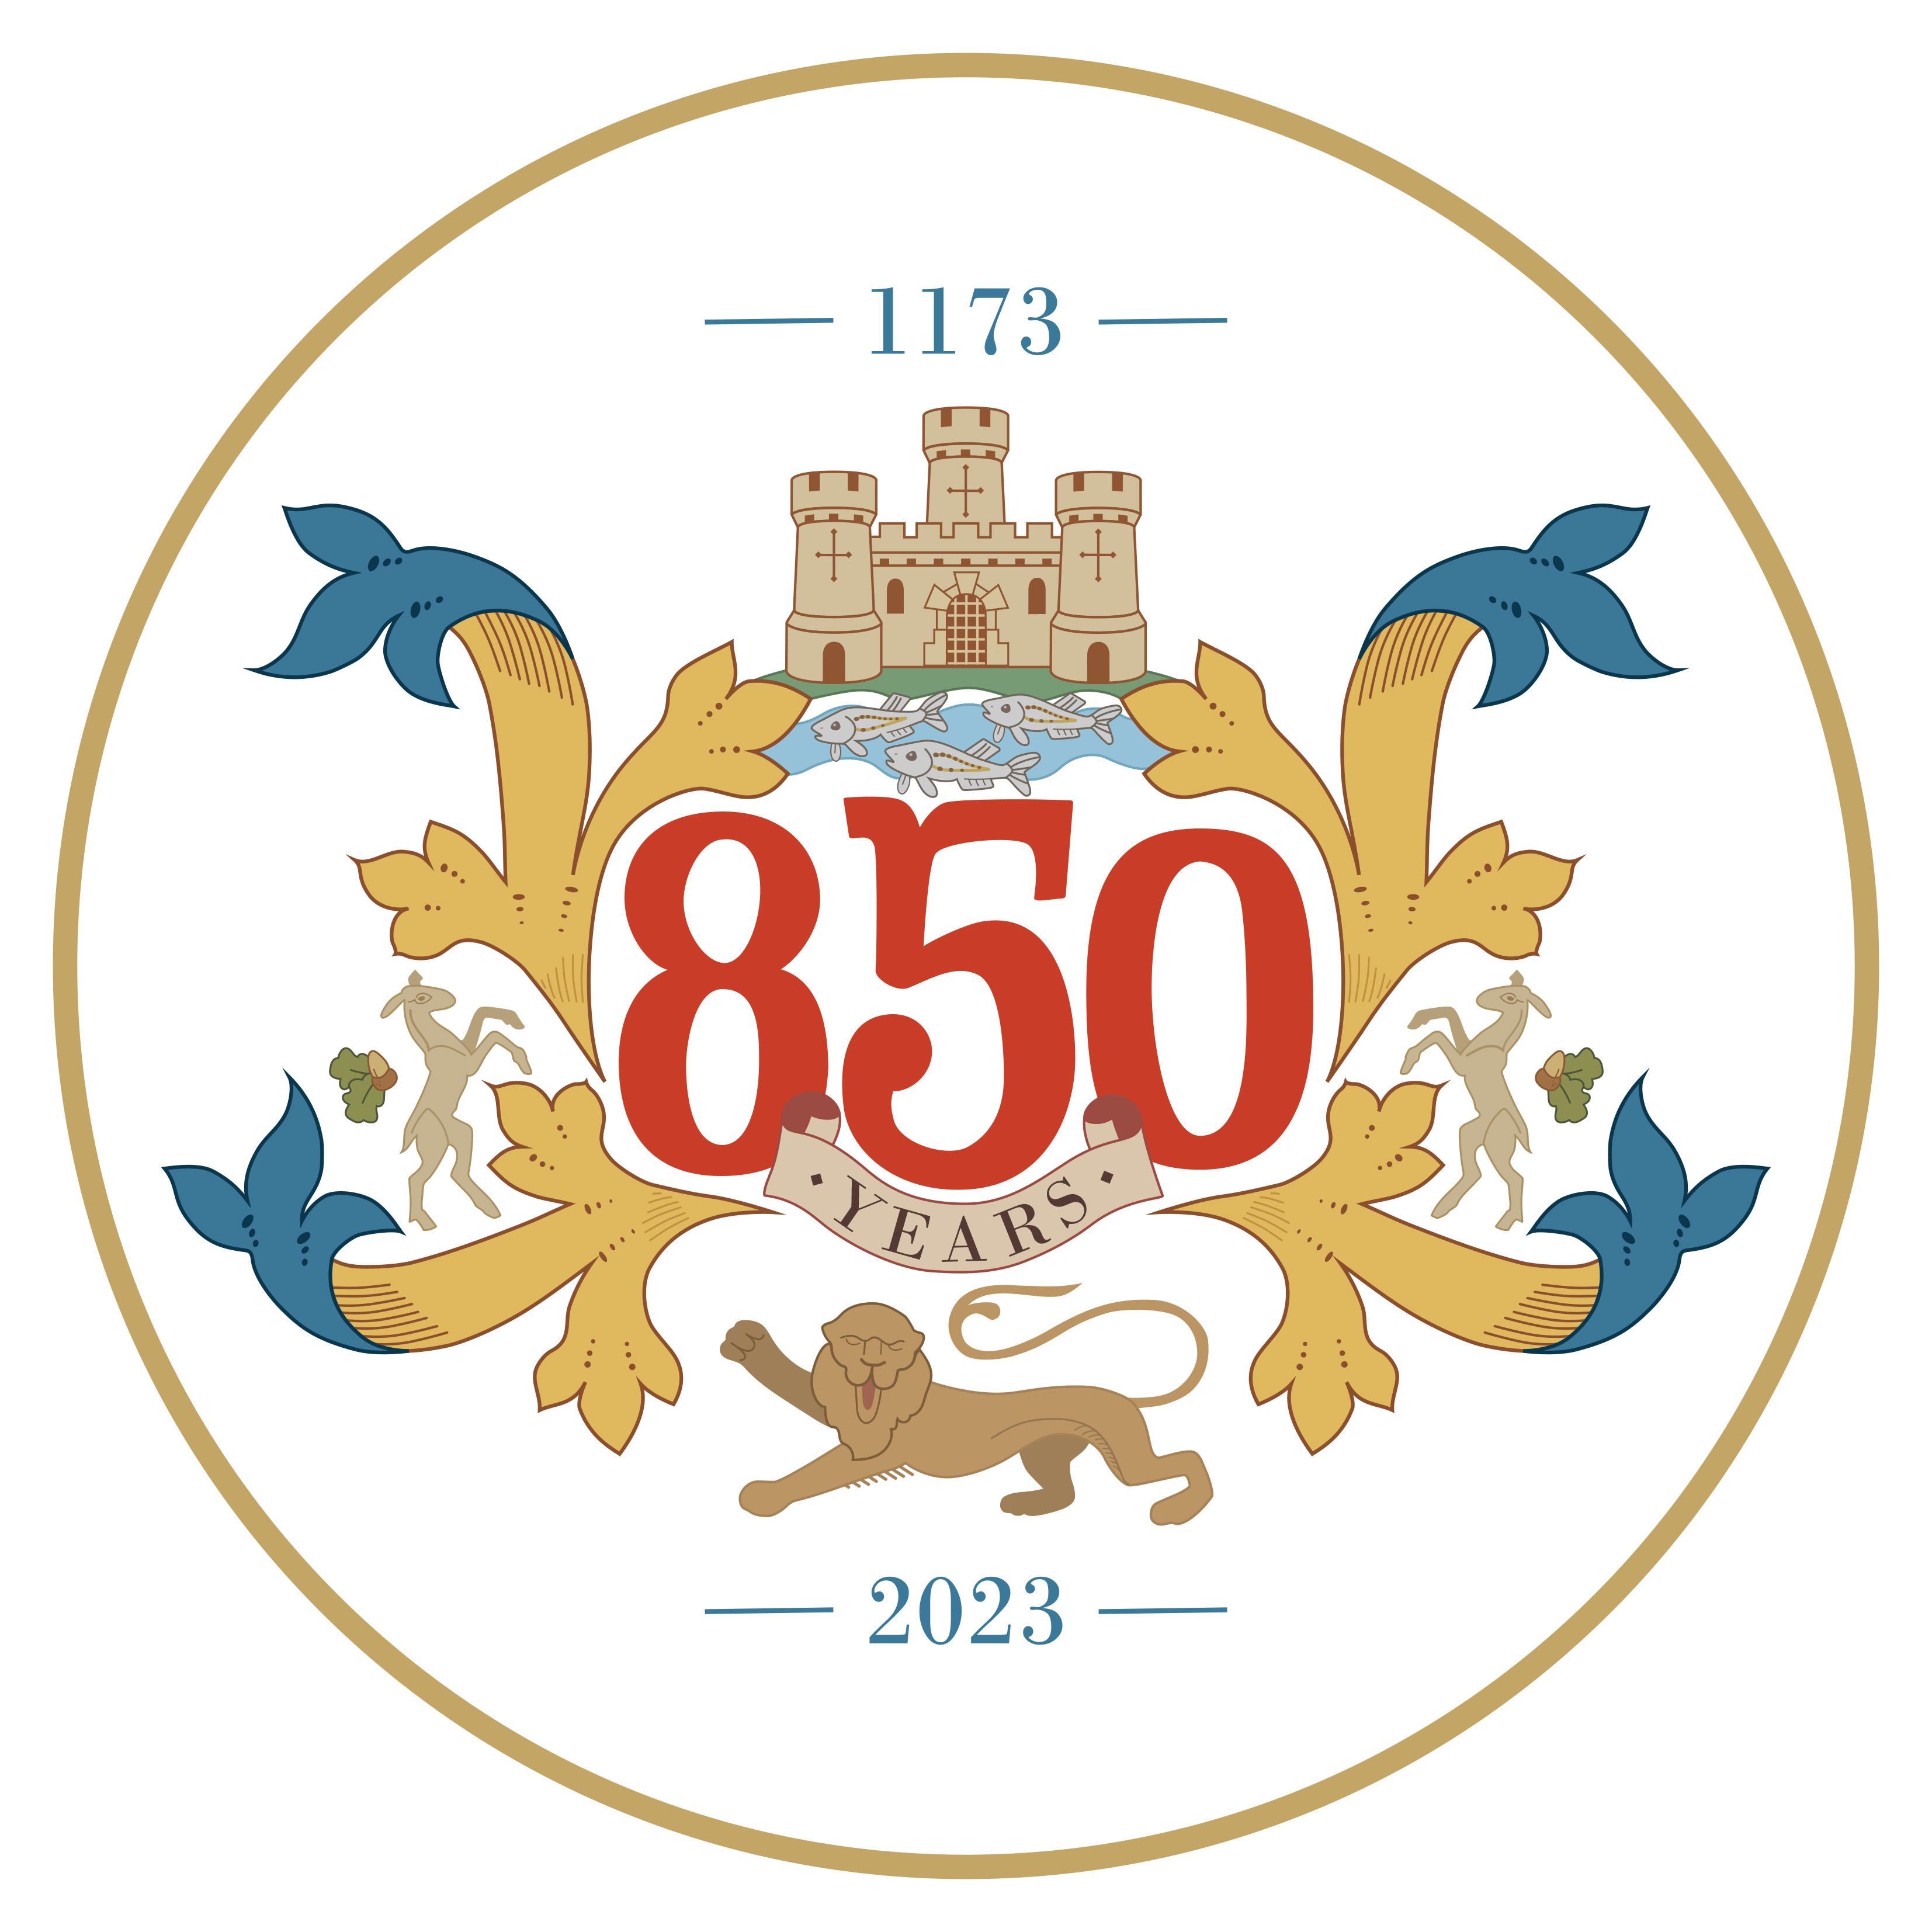 850th anniversary celebrations, royal charter, Newcastle-under-Lyme, borough, history, heritage, events, legacy.